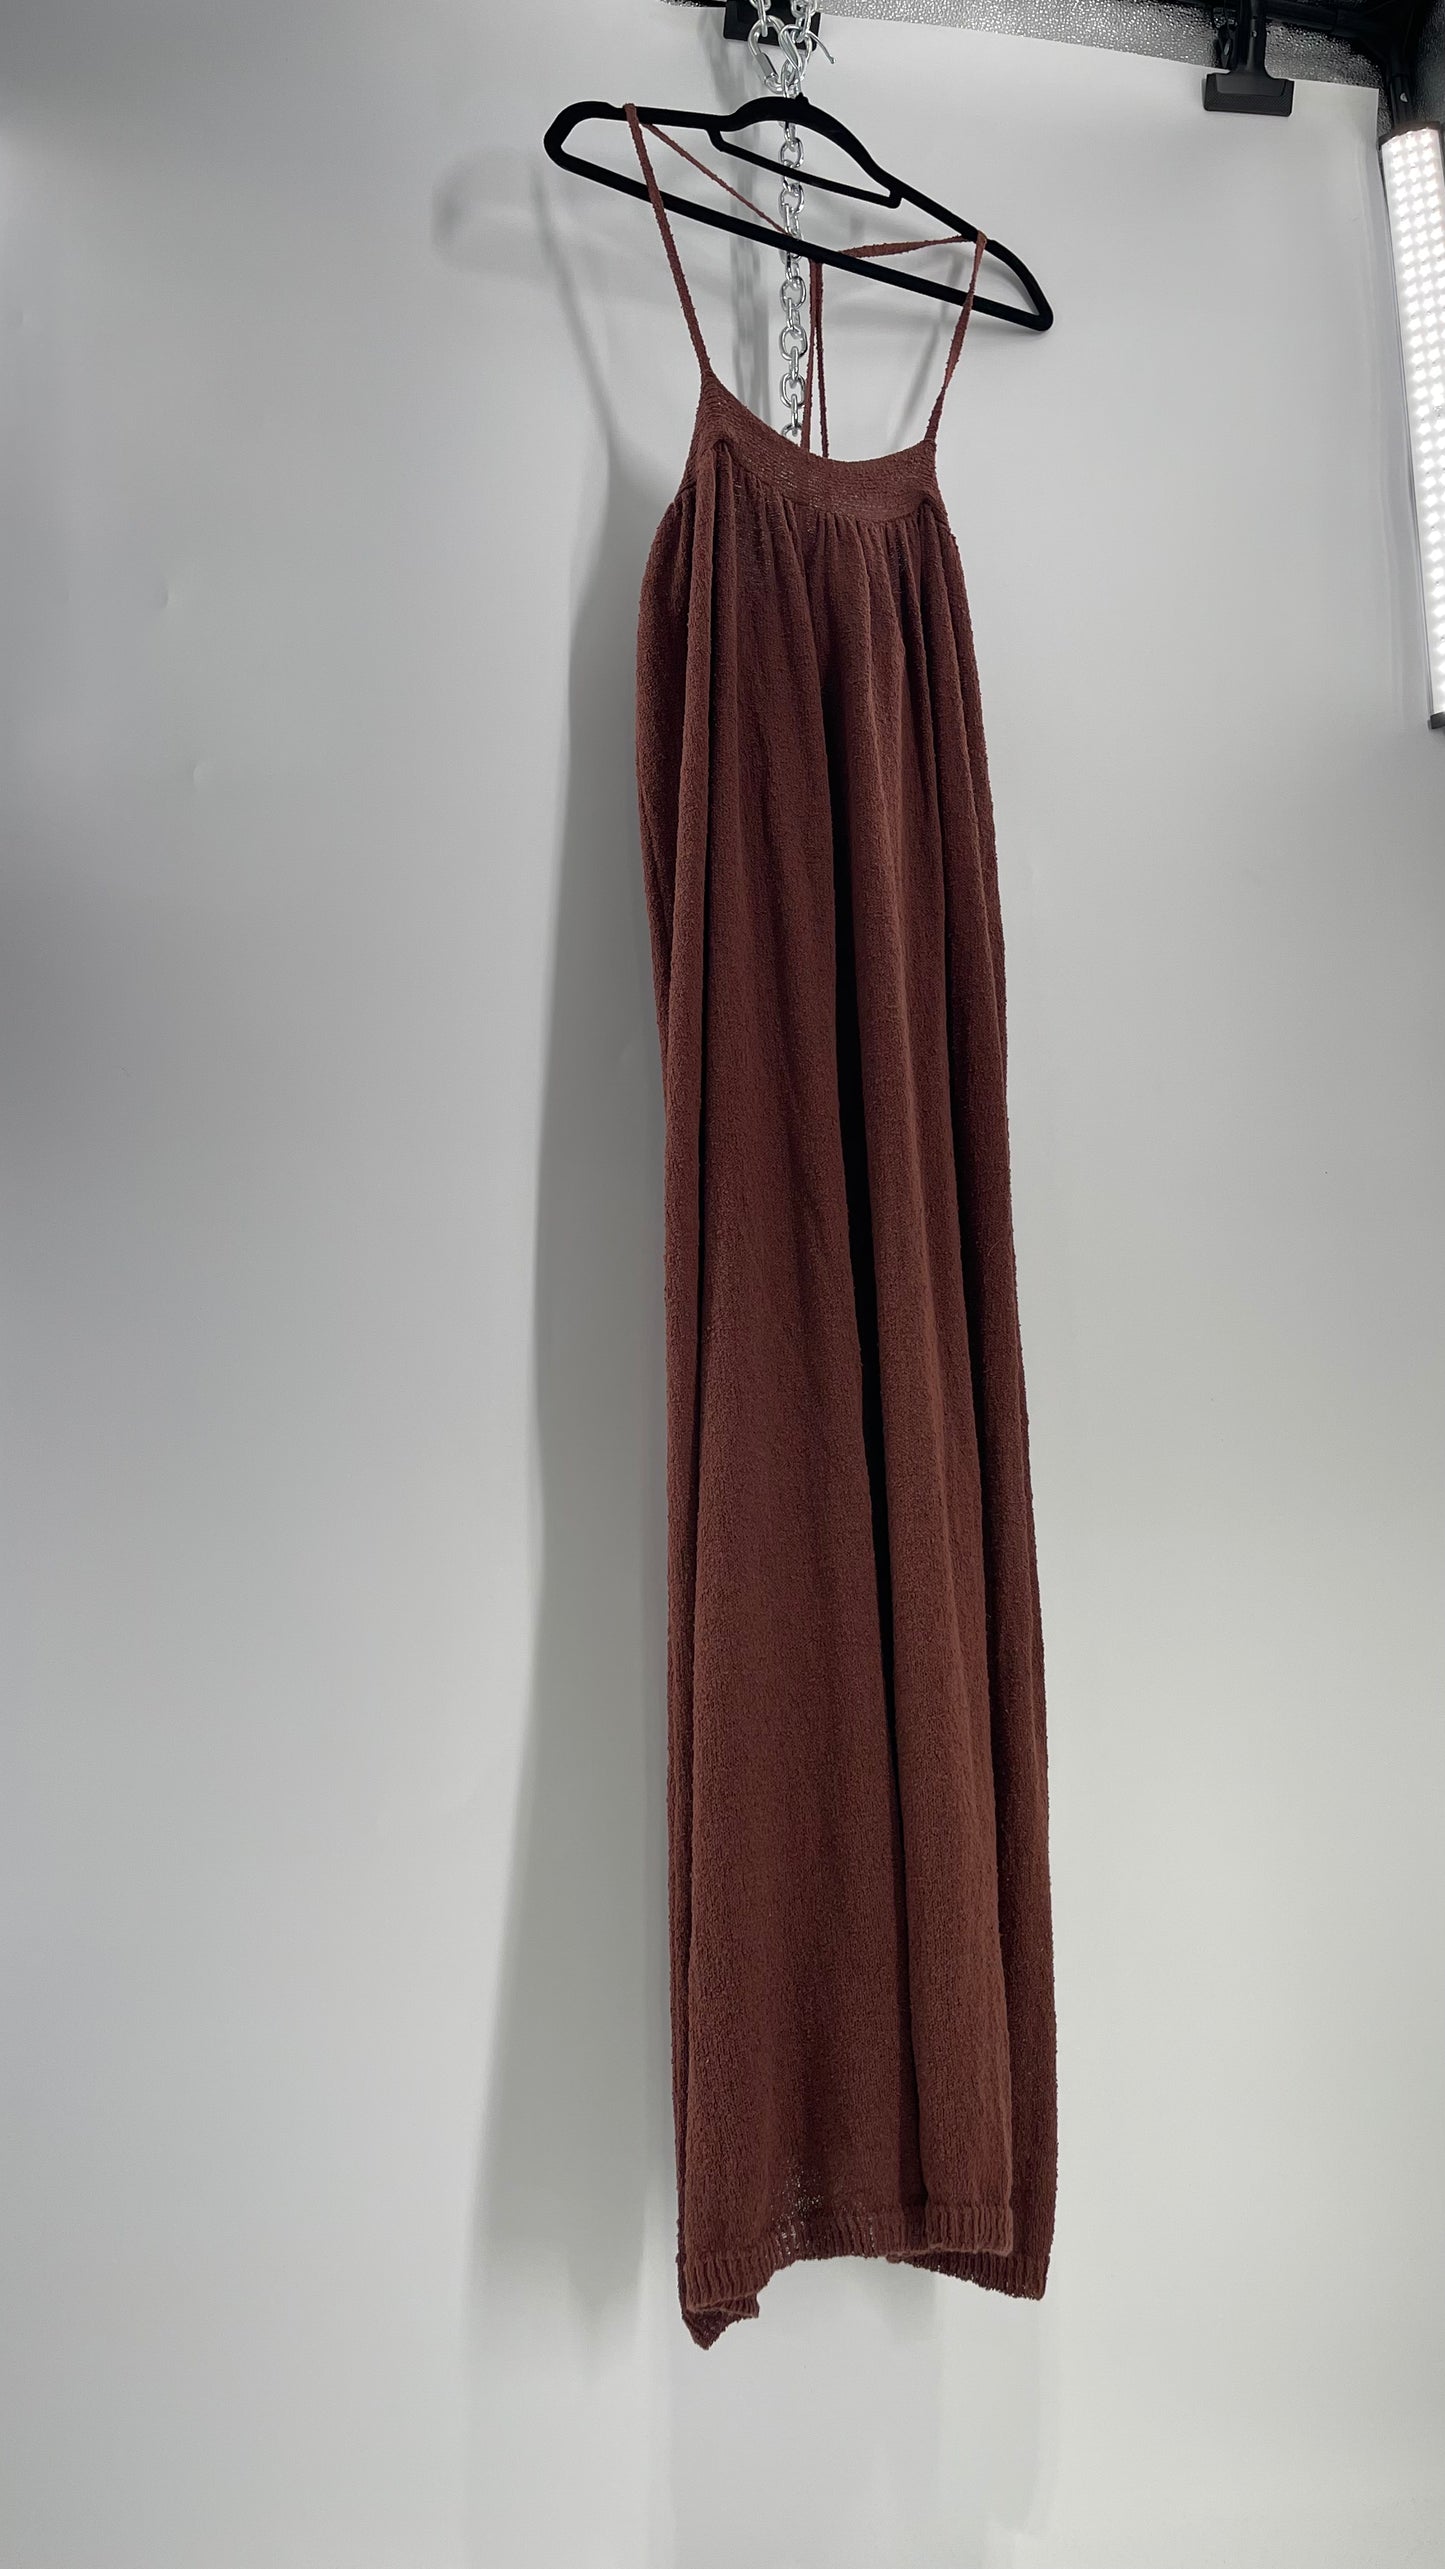 Free People Slinky Textured Brown Knit Full Length Dress (Small)